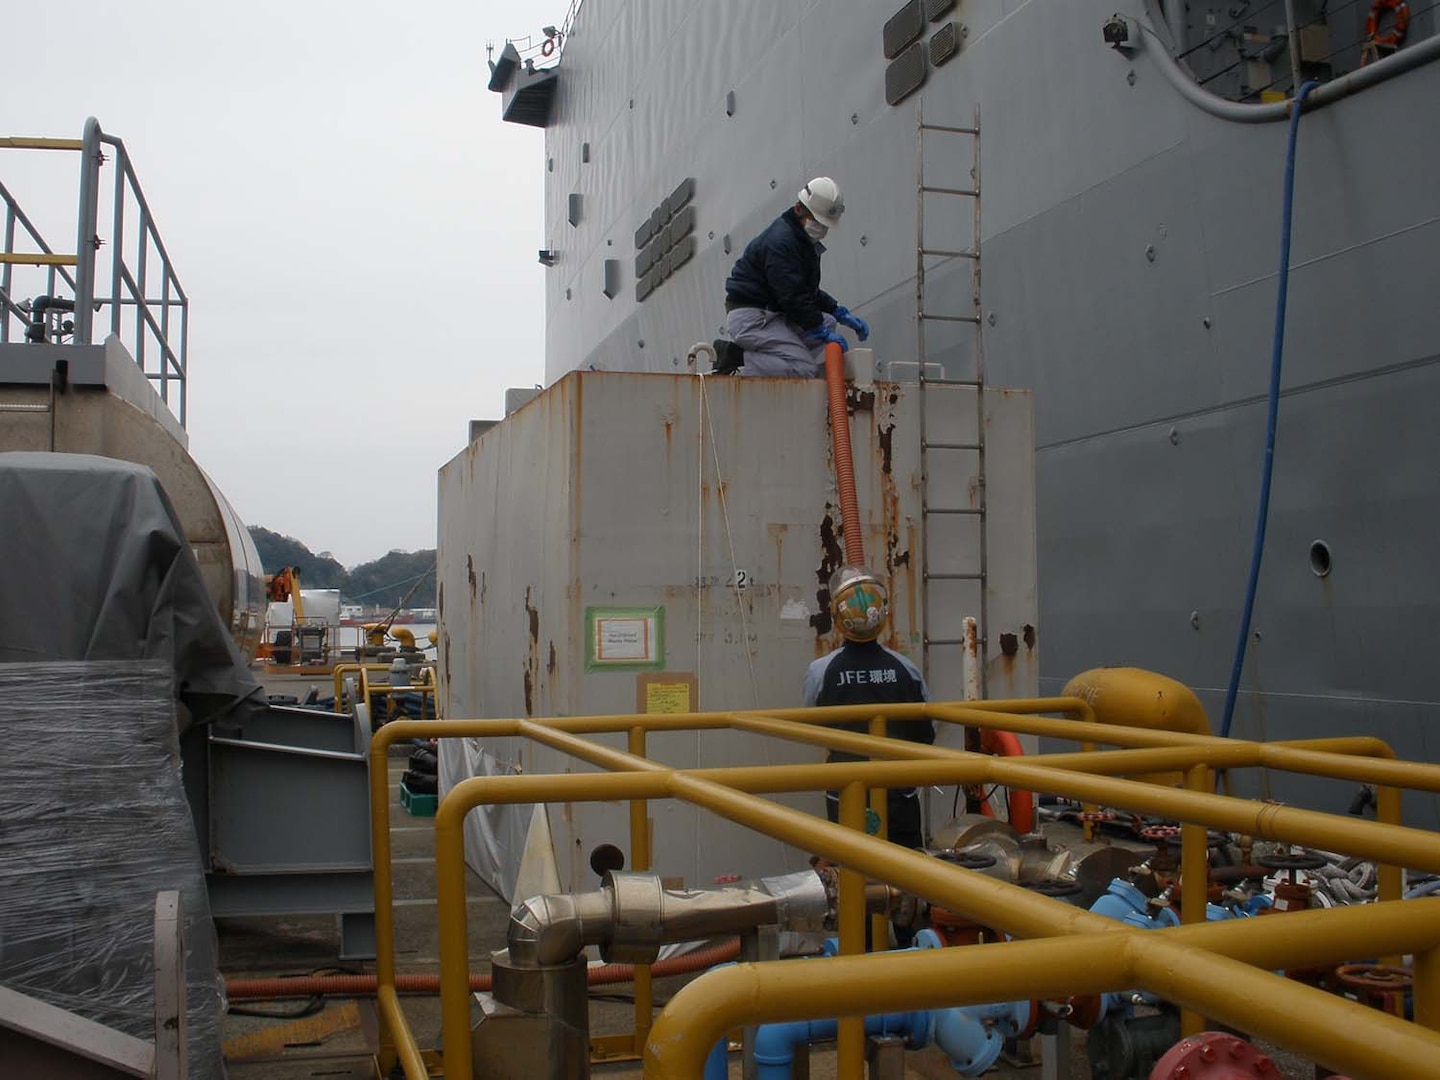 Employees from Japan Iron Engineering work on above ground holding tanks used for storing hazardous waste materials removed from Navy at Fleet Activities, Yokuska, Japan. Photo by Yasuo Tsunoda